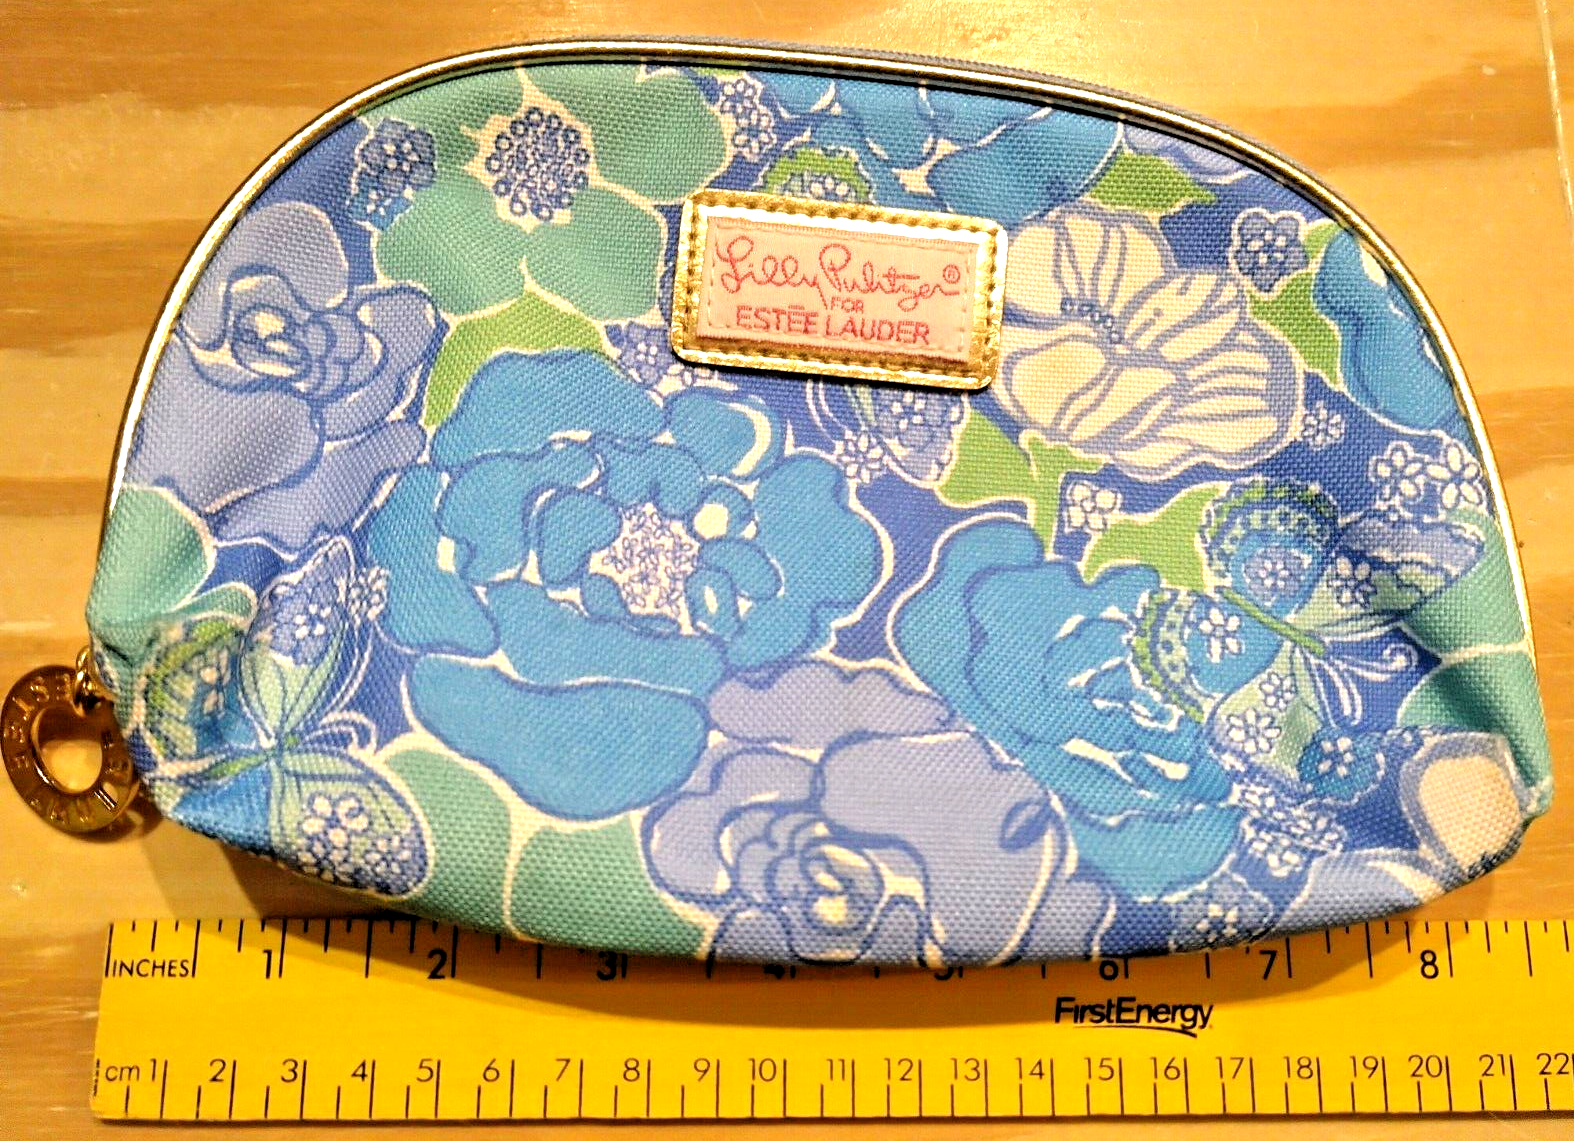 Lilly Pulitzer for Estee Lauder Turquoise Butterfly Small Cosmetic Case - $15.60